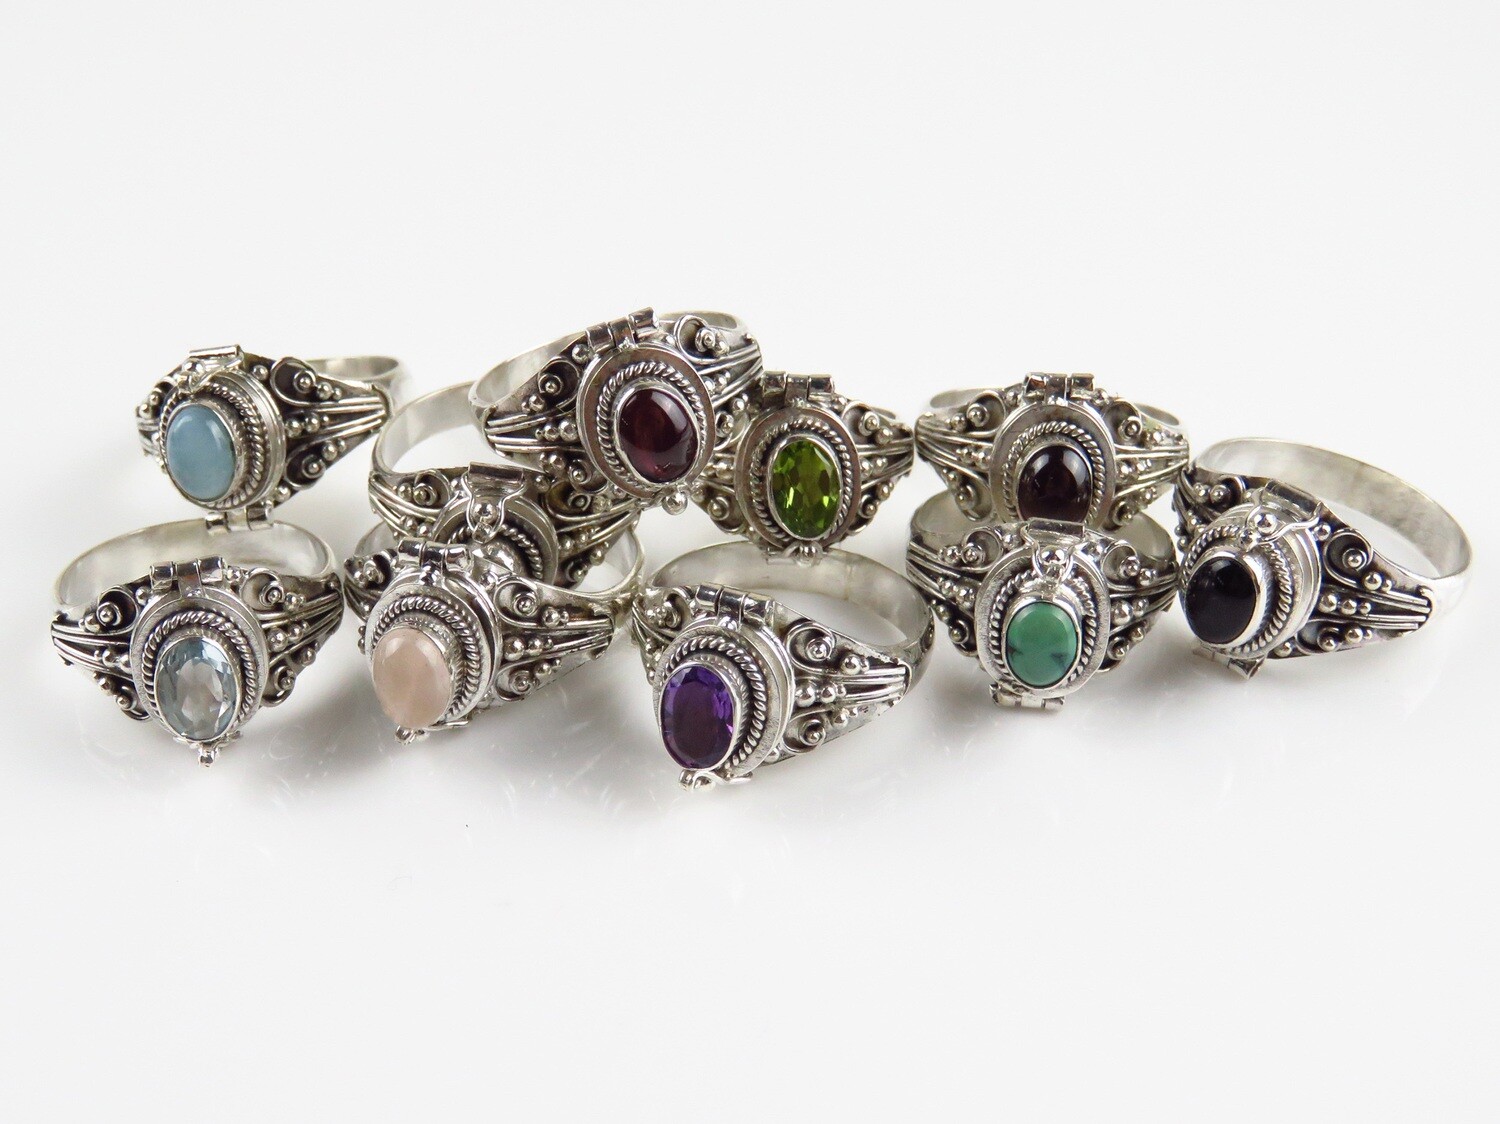 Wholesale lot, Sterling Silver, Mixed Gemstone,  10 Pieces, Locket Rings SSB-415